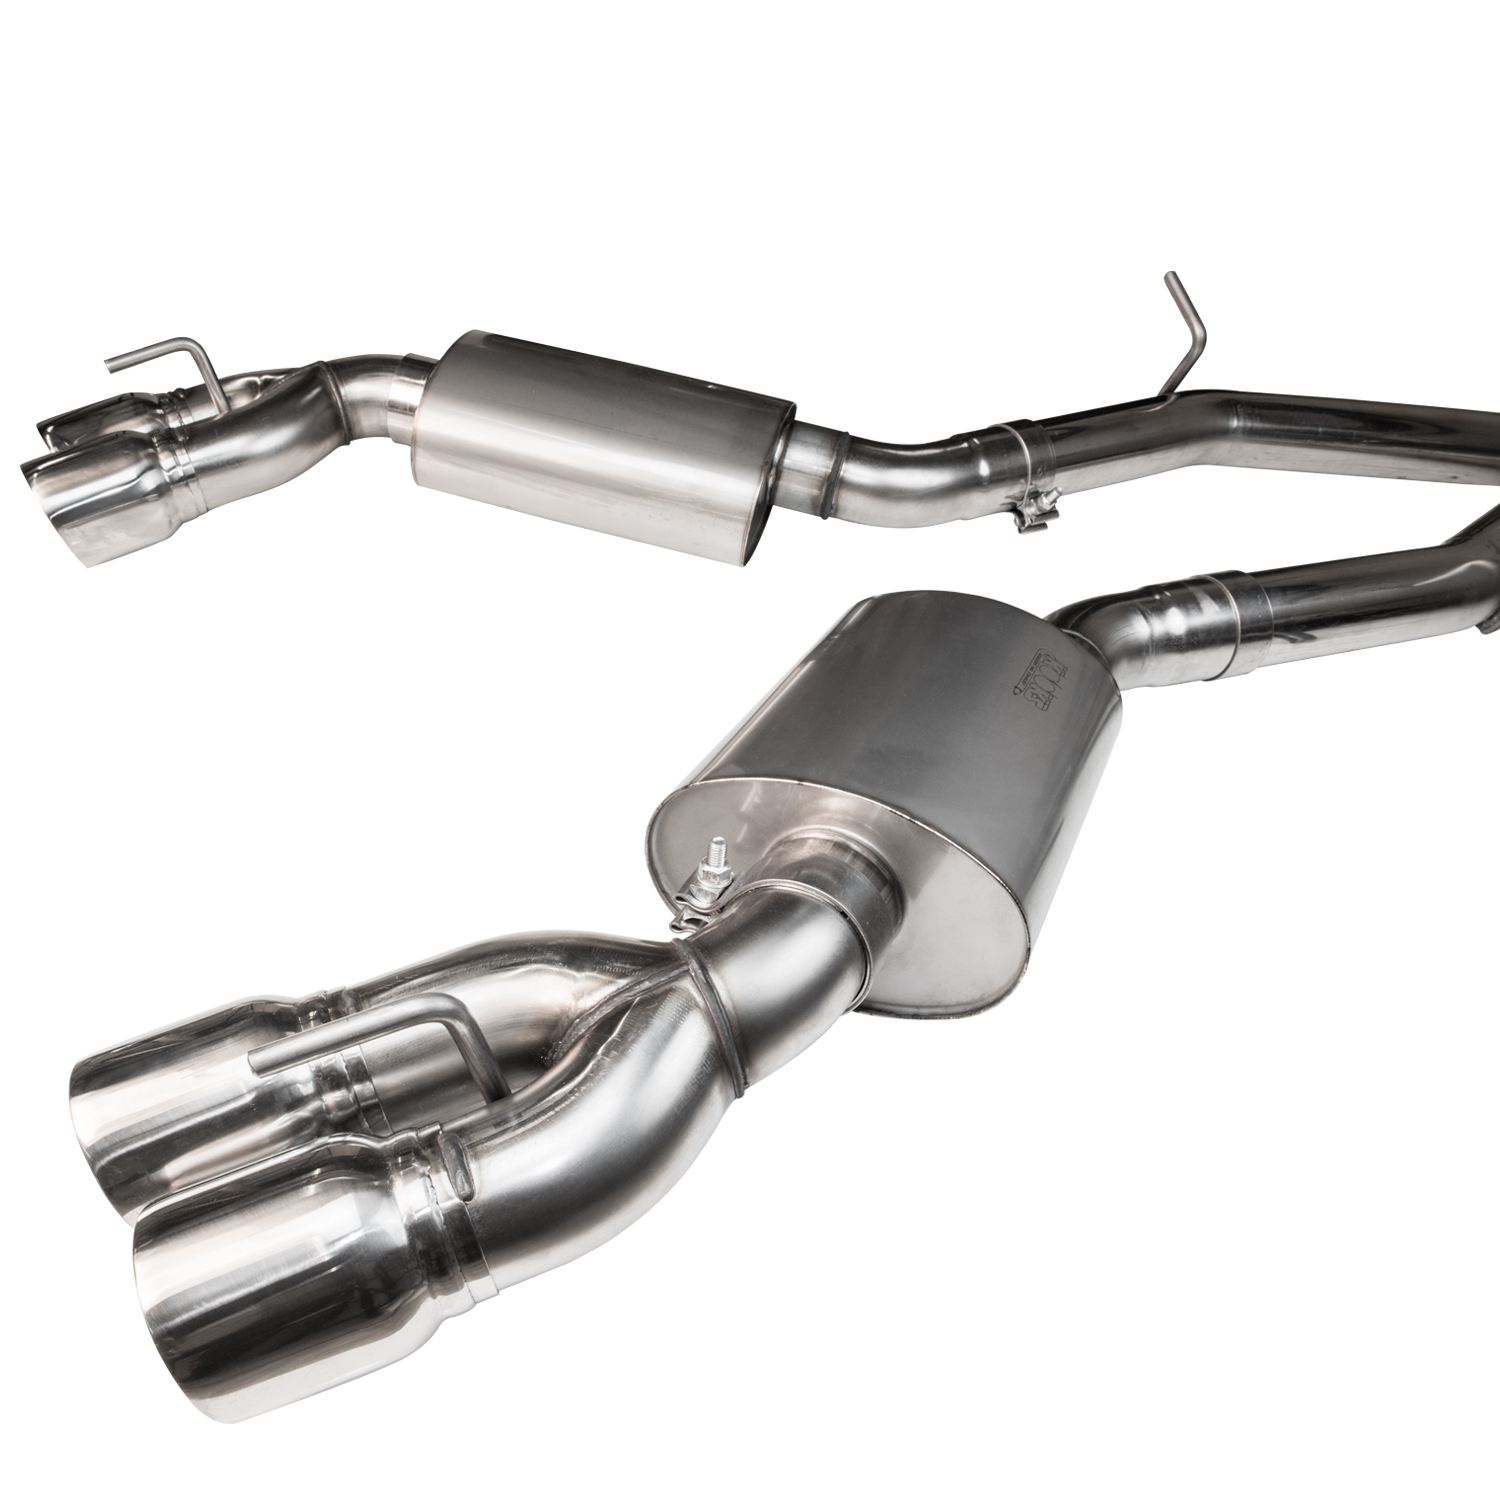 Complete 3" Exhaust System with Torca Tight Clamps Includes 3" GREEN Catted Pipes X-Pipe Kooks Oval Race Mufflers And 4" Polishe